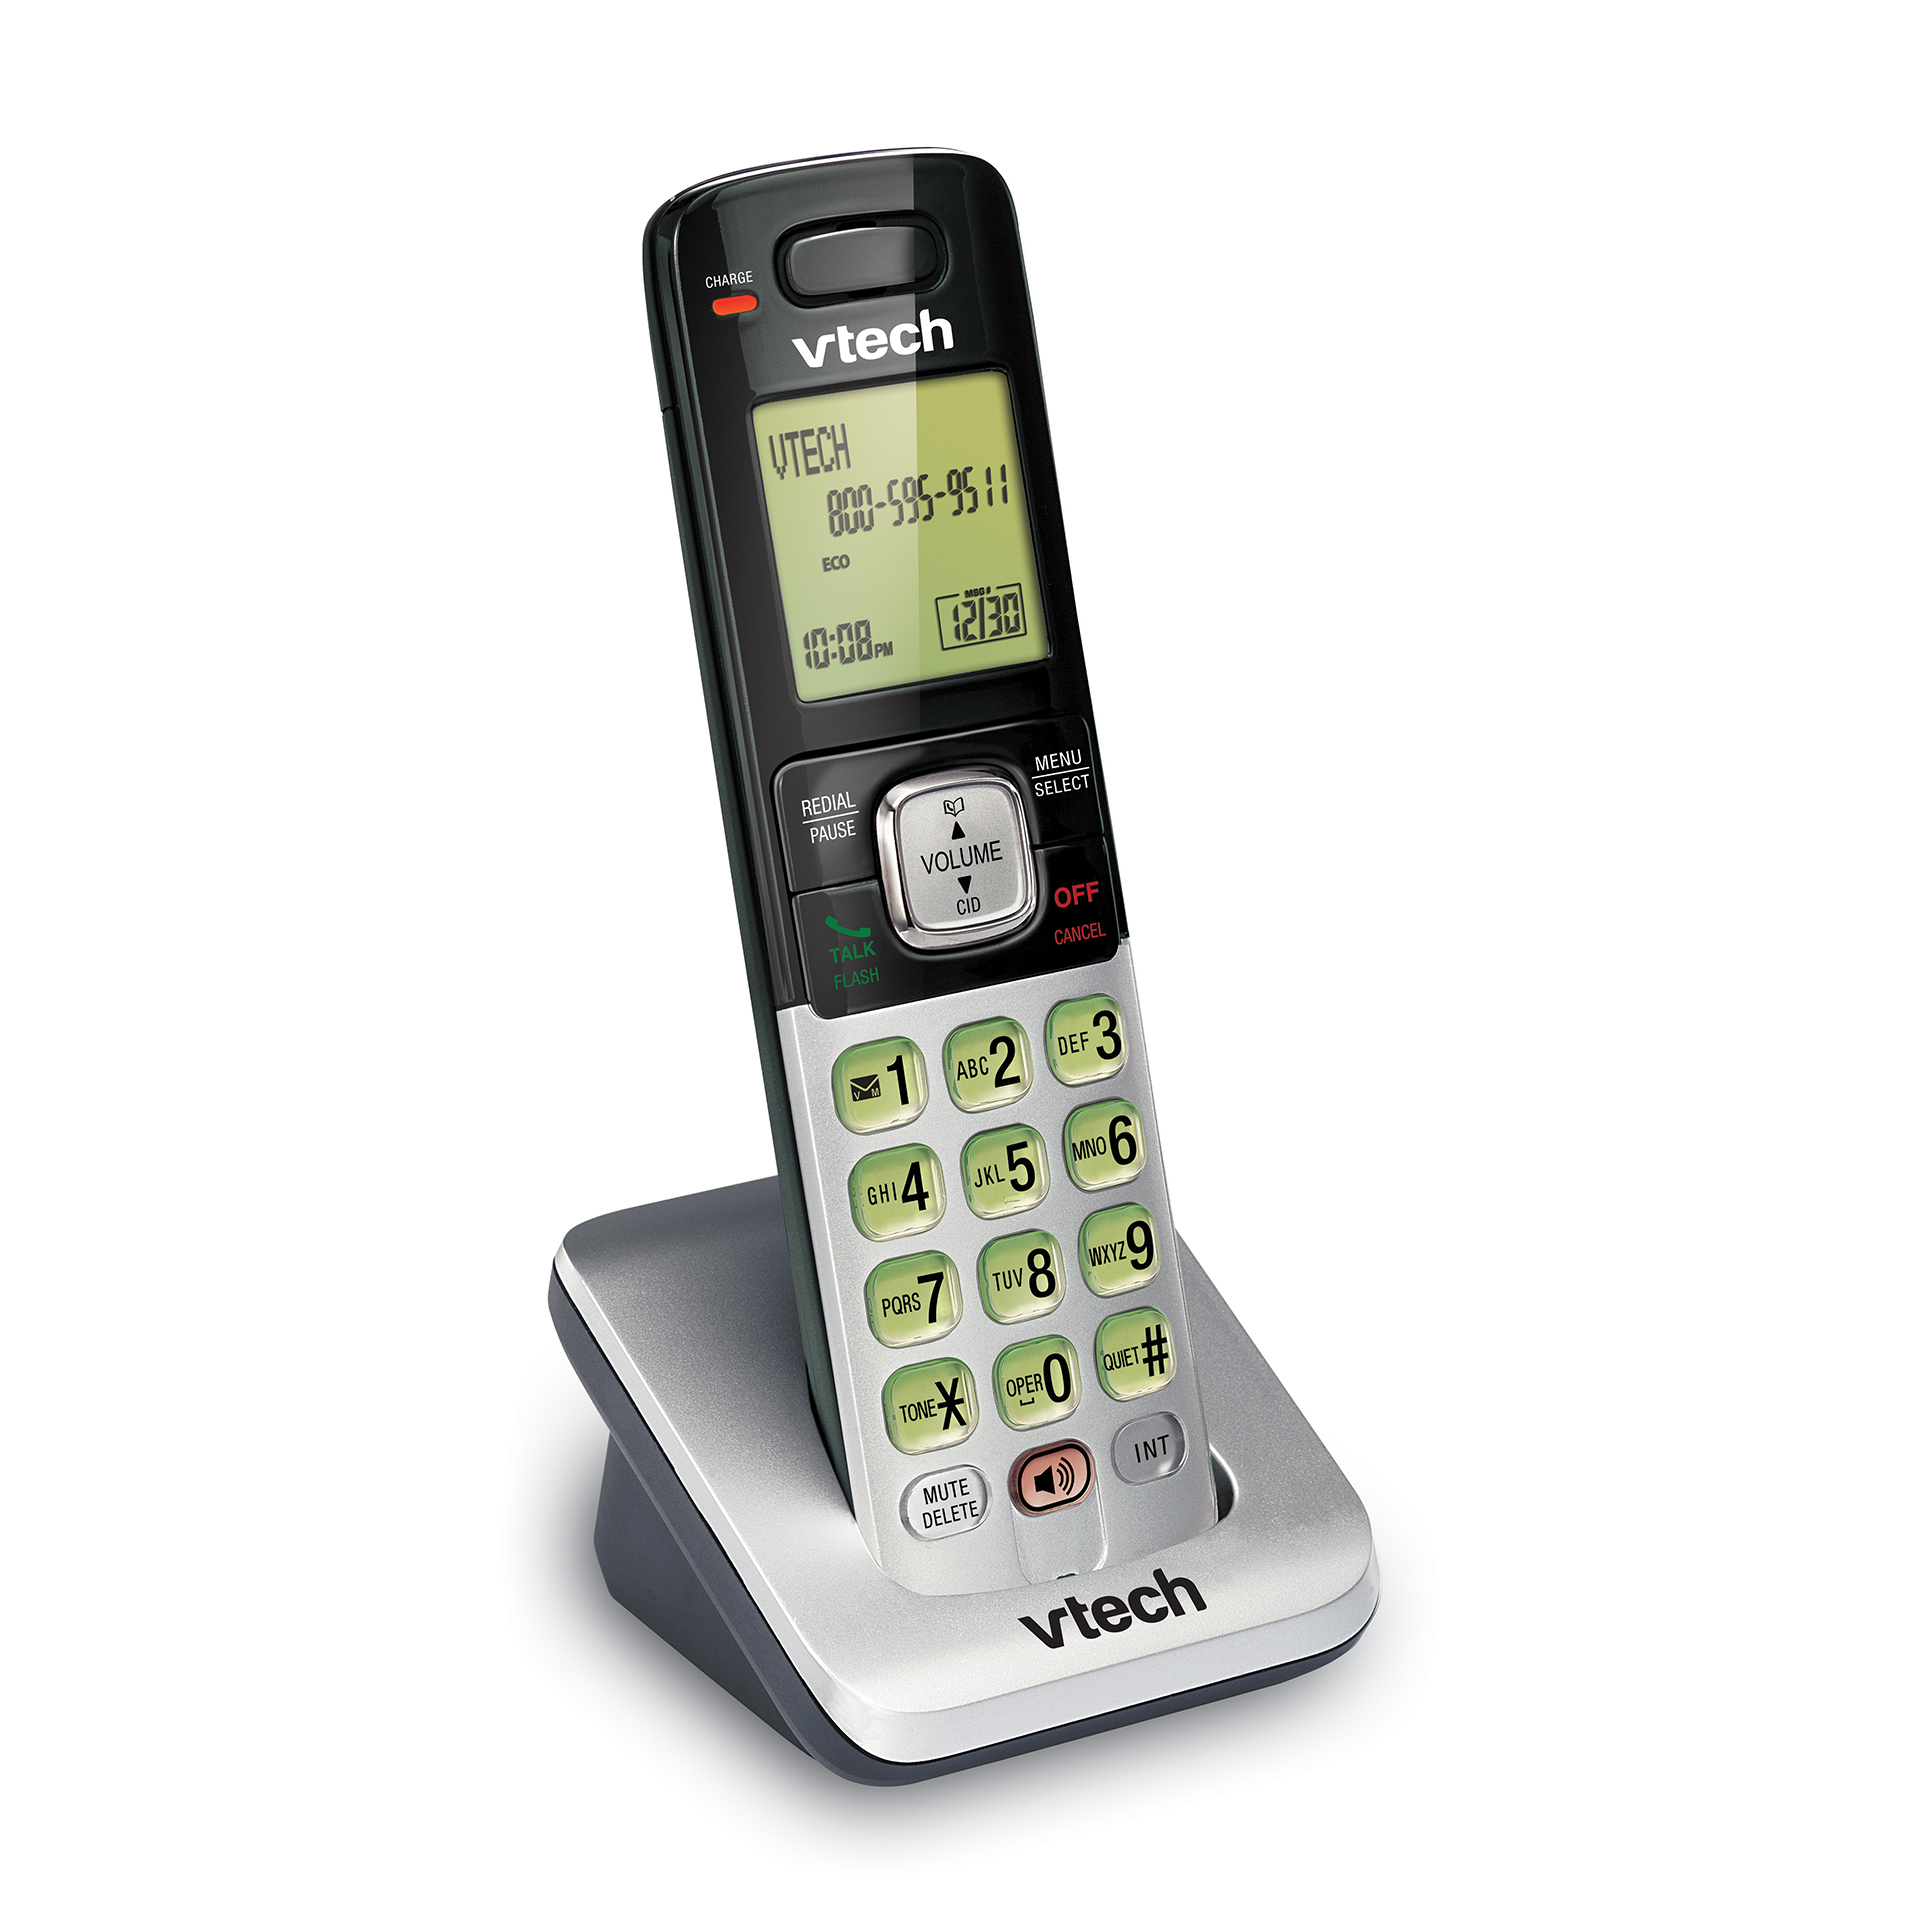 Accessory Handset with caller ID/call Waiting